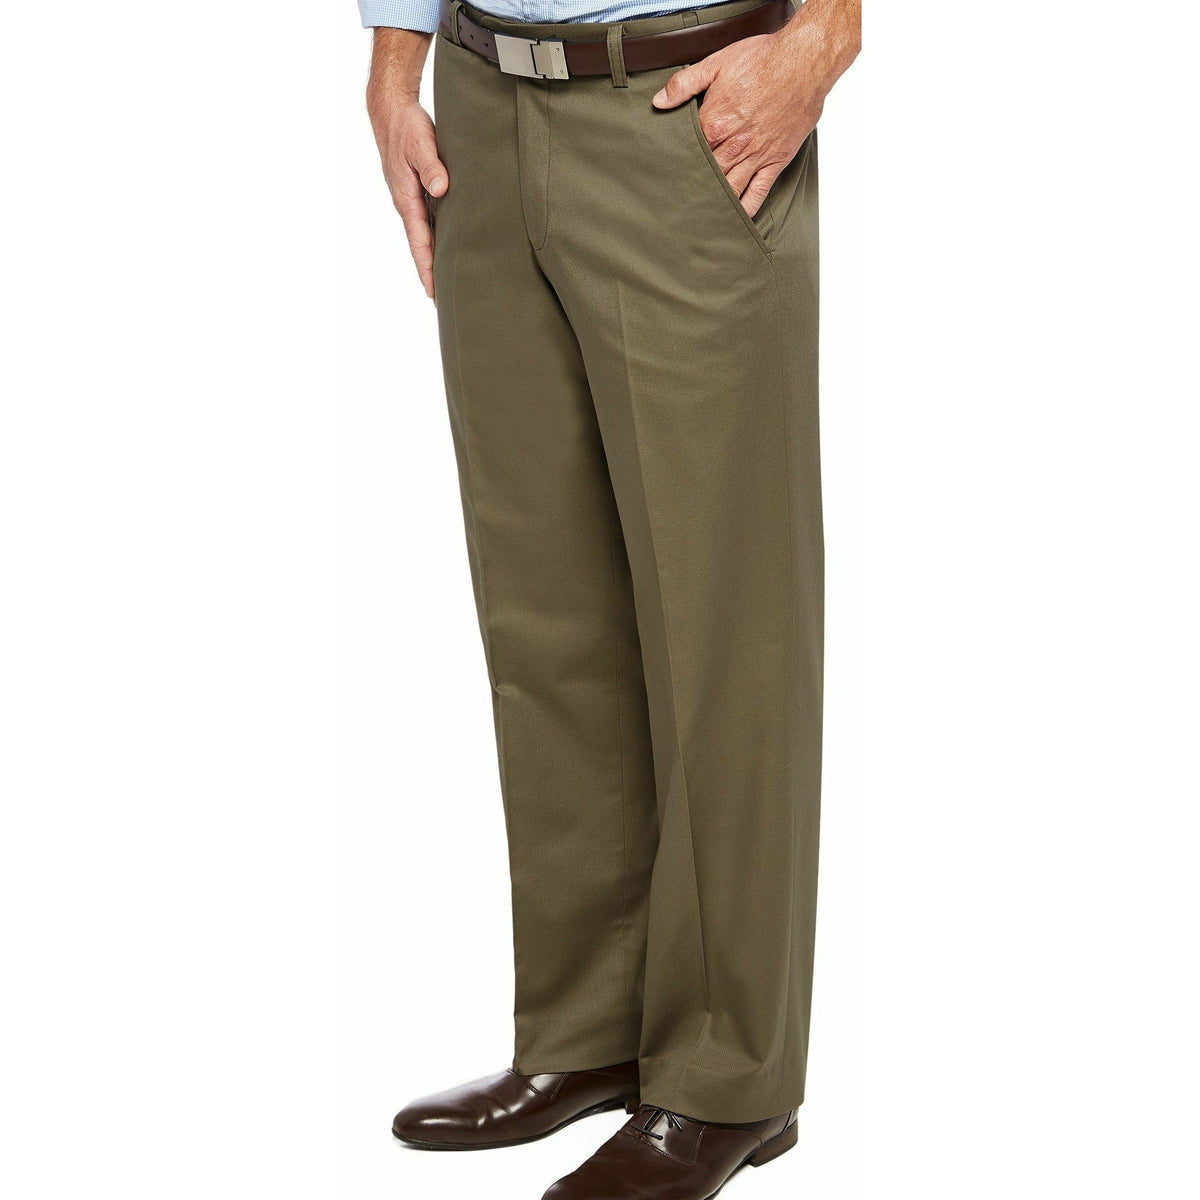 Pacific Flex Wrinkle Resistant Classic Chino